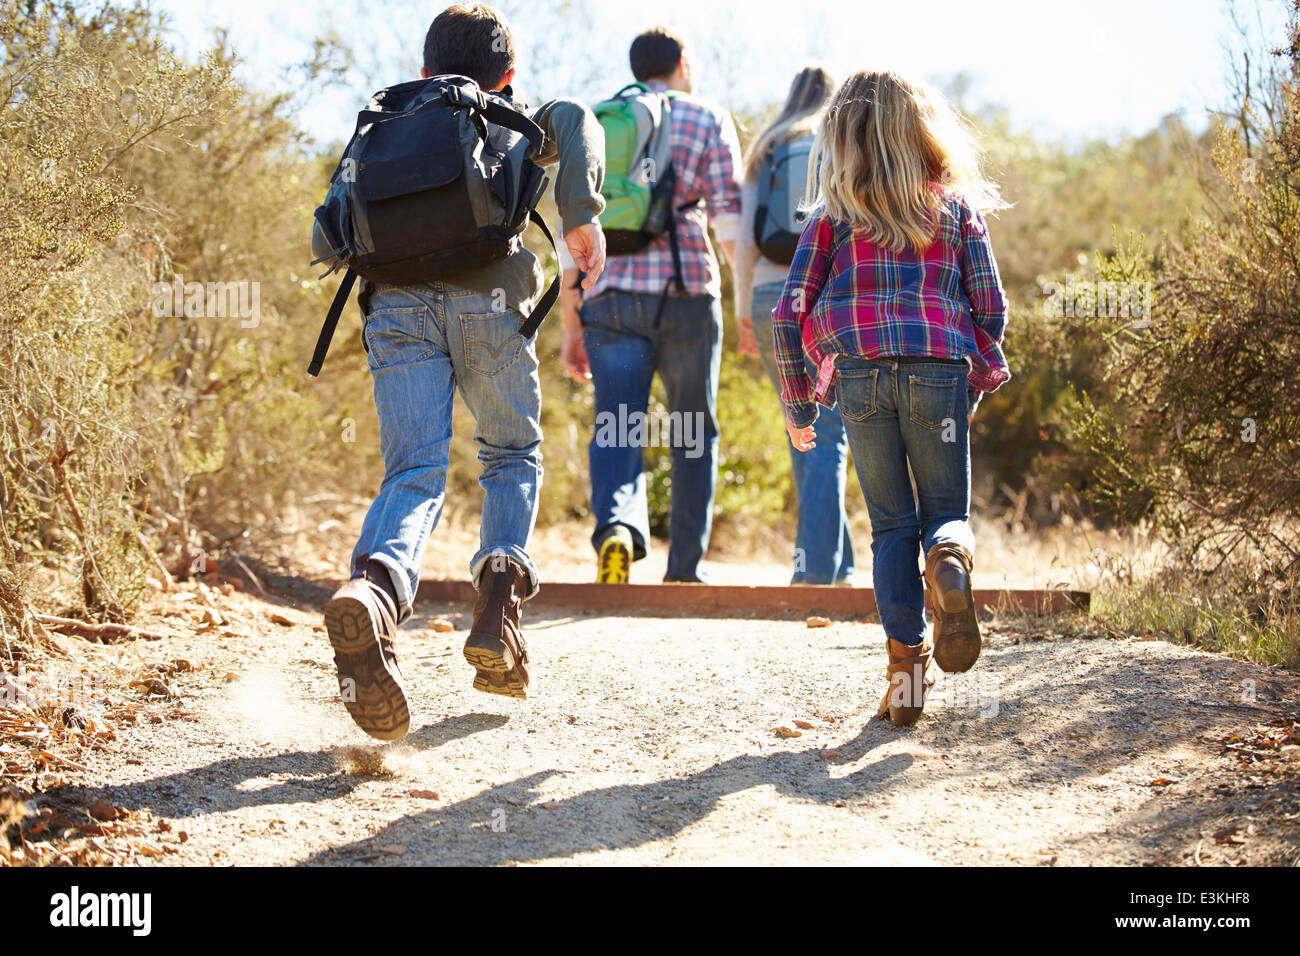 Rear View Of Family Hiking In Countryside Wearing Backpacks Stock Photo